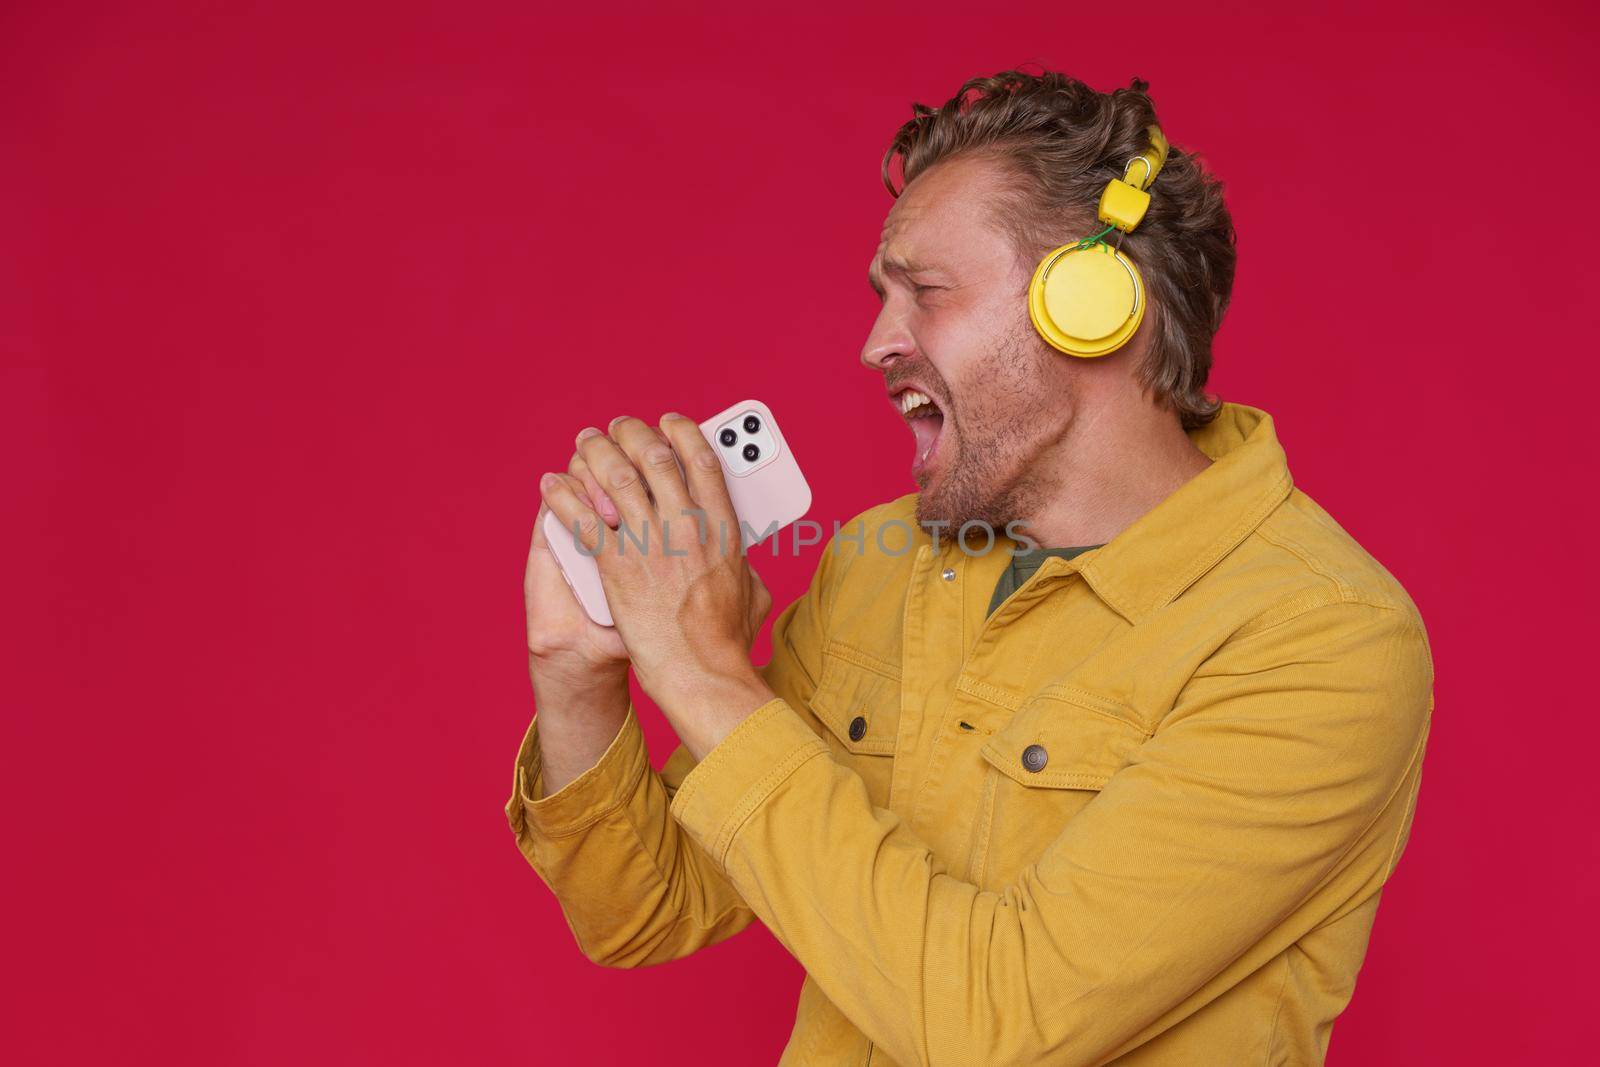 Handsome man 30s singing enjoying his favorite song or track using phone and wireless headphones wearing denim yellow jacket isolated on red background. Joyful man sing while listen music.